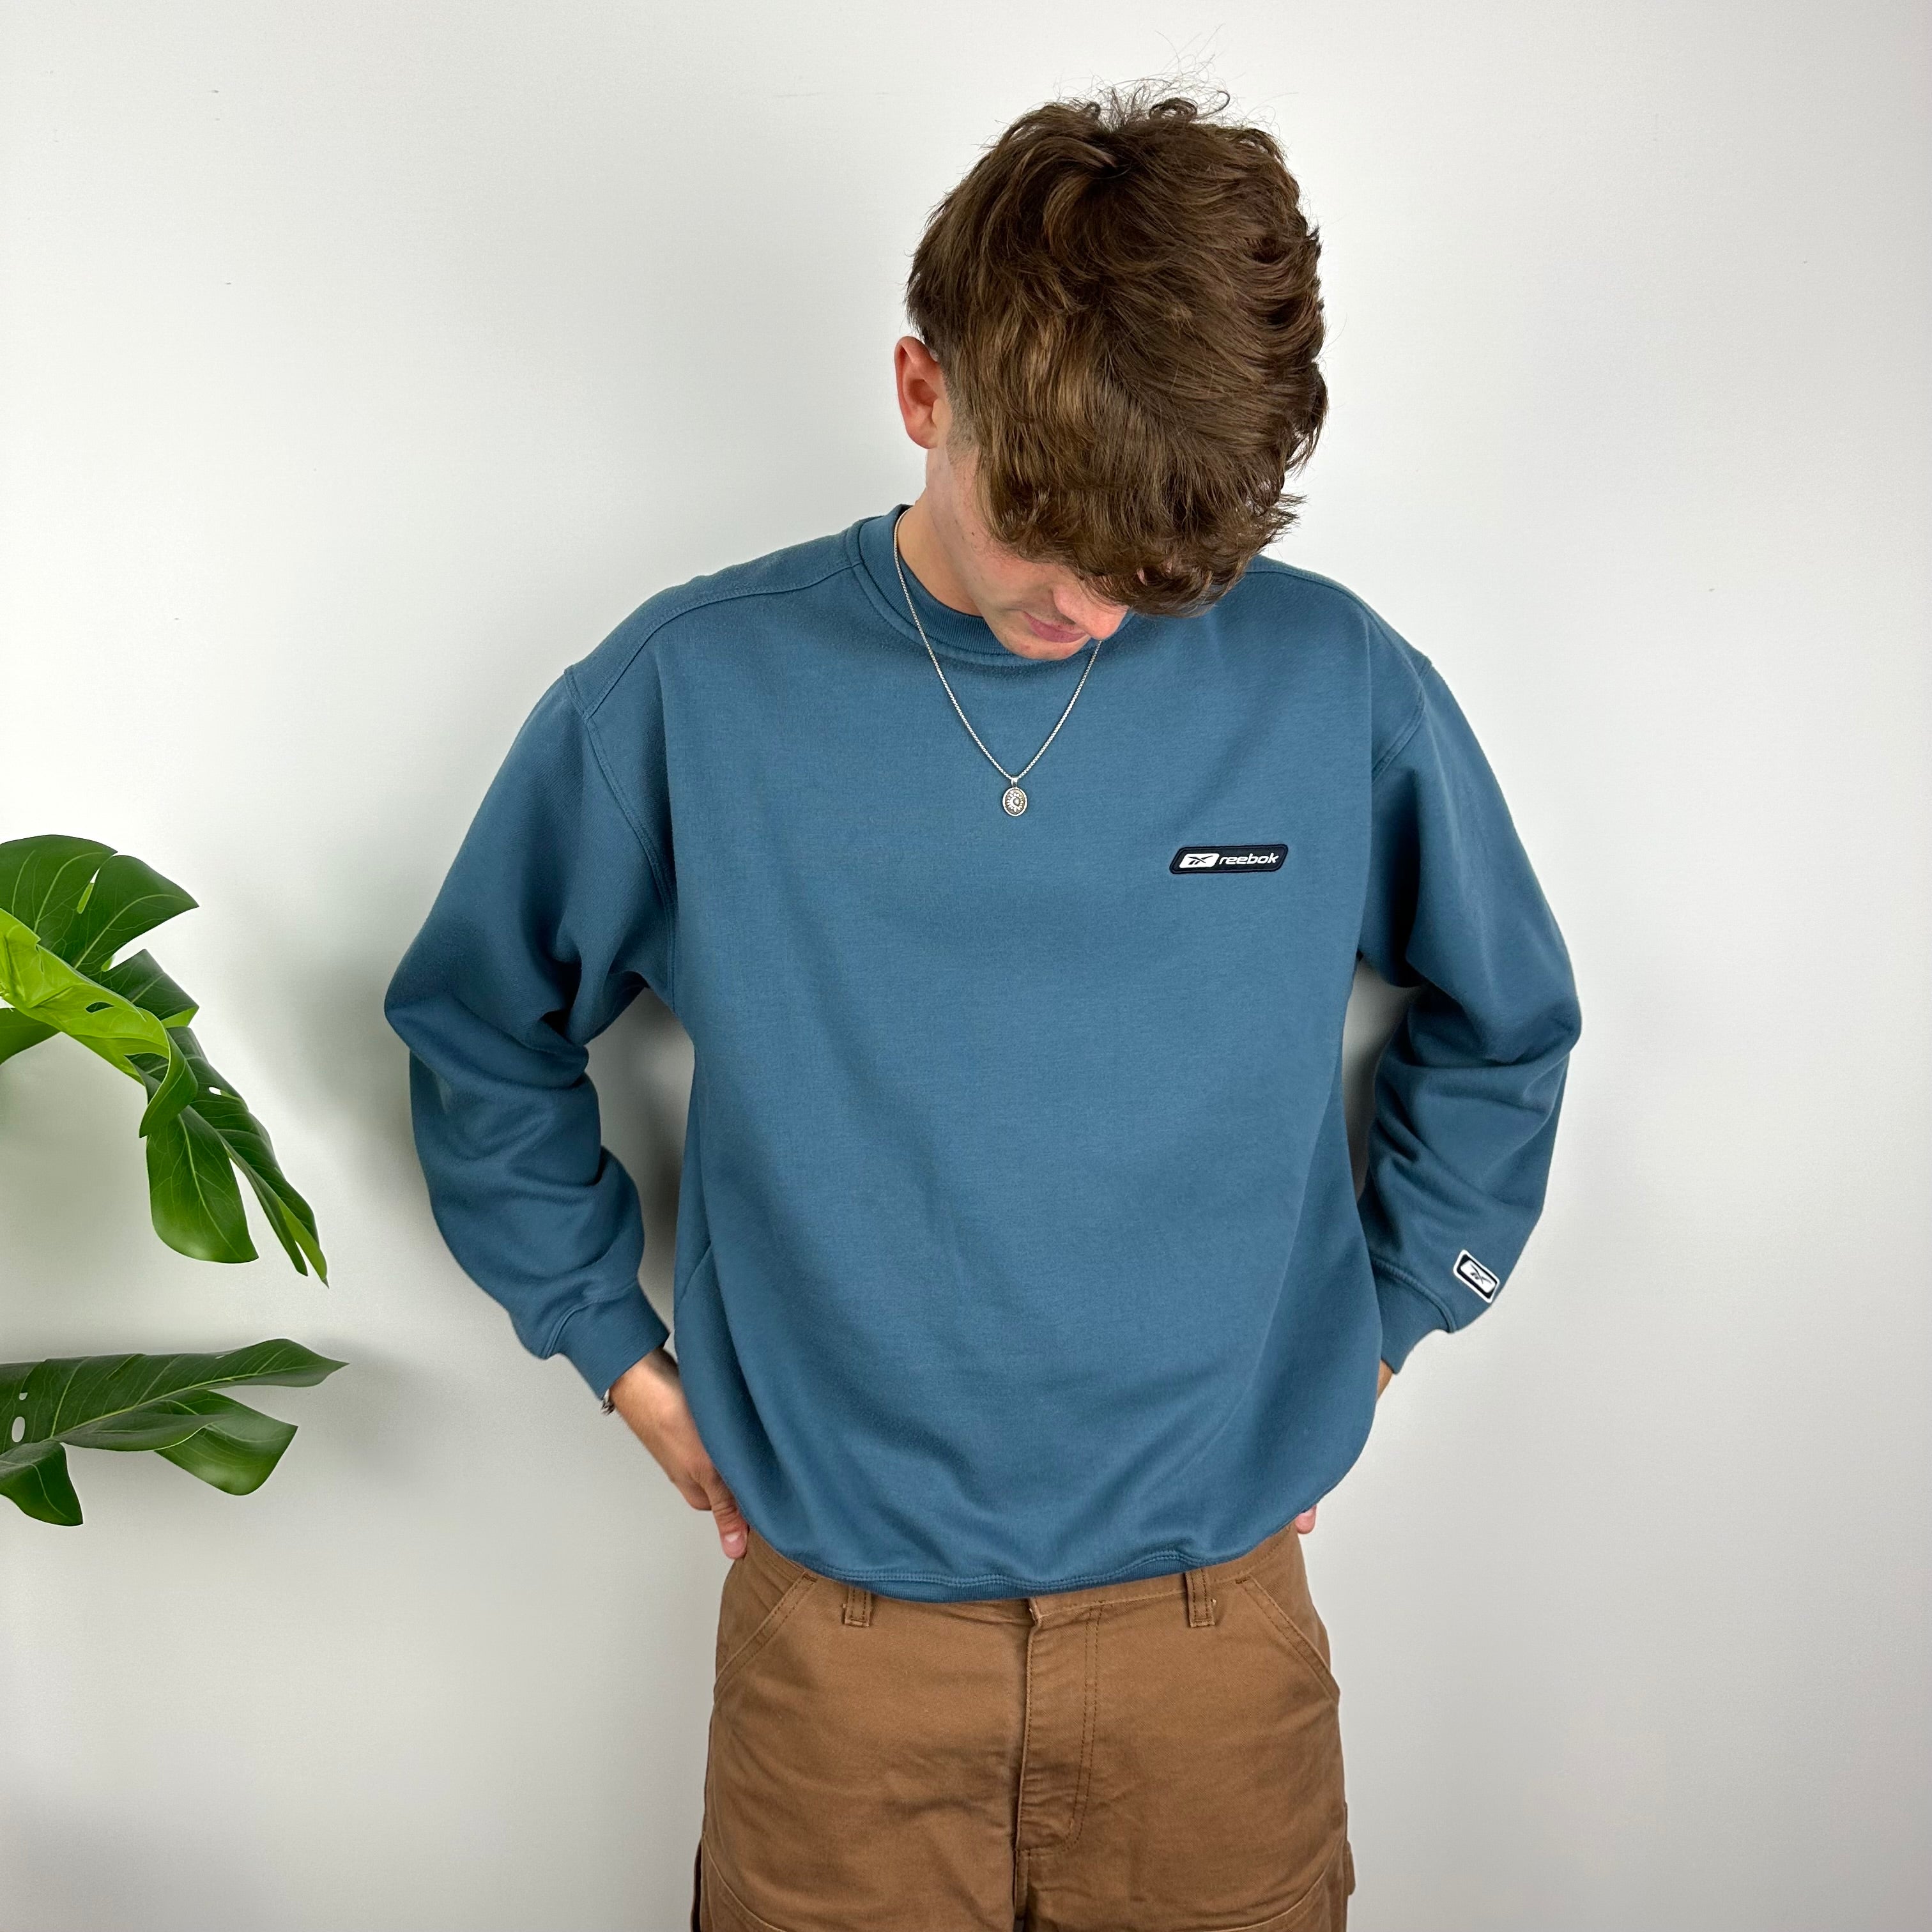 Reebok RARE Blue Embroidered Spell Out Sweatshirt (M)